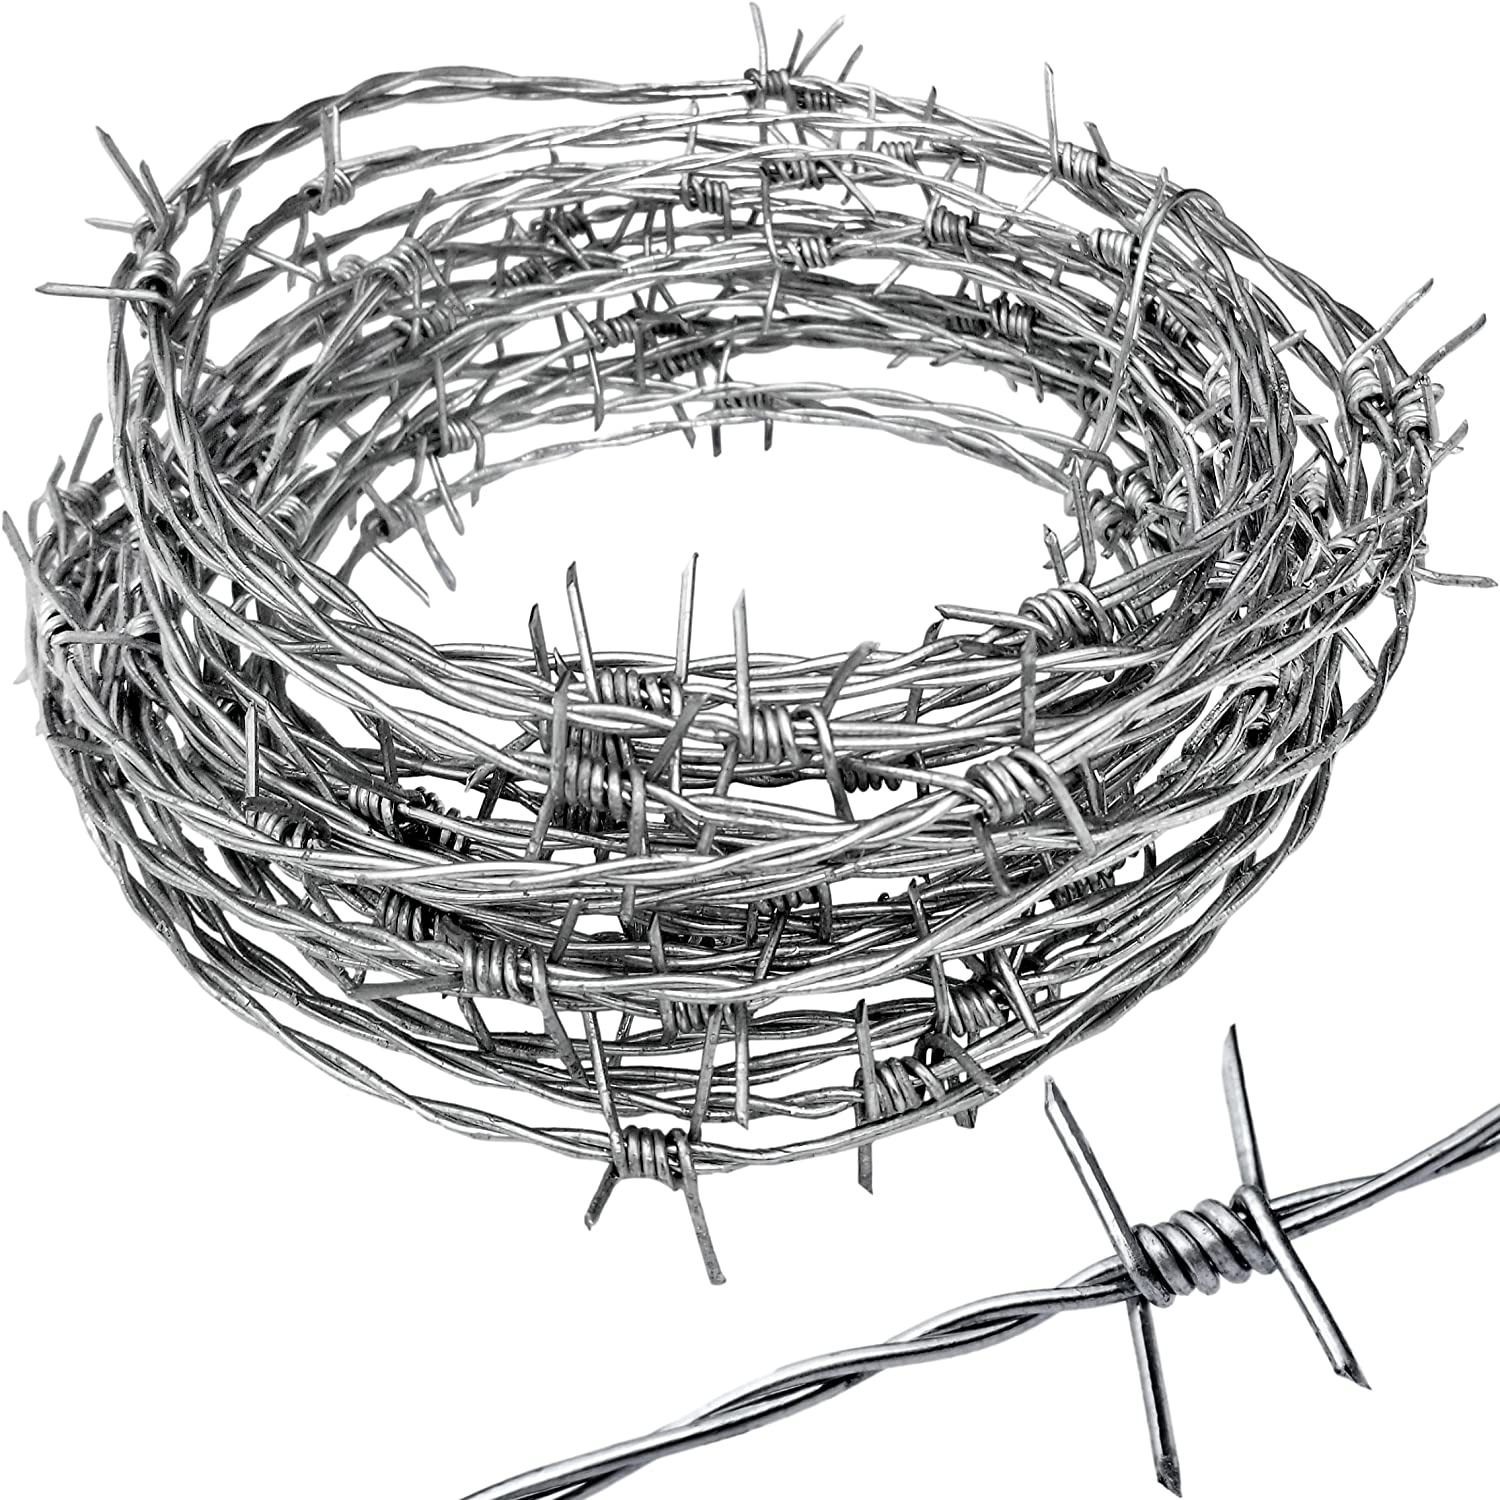 Real Barbed Wire 25Ft 18 Gauge - Great for Crafts, Fences, and Critter Deterrent